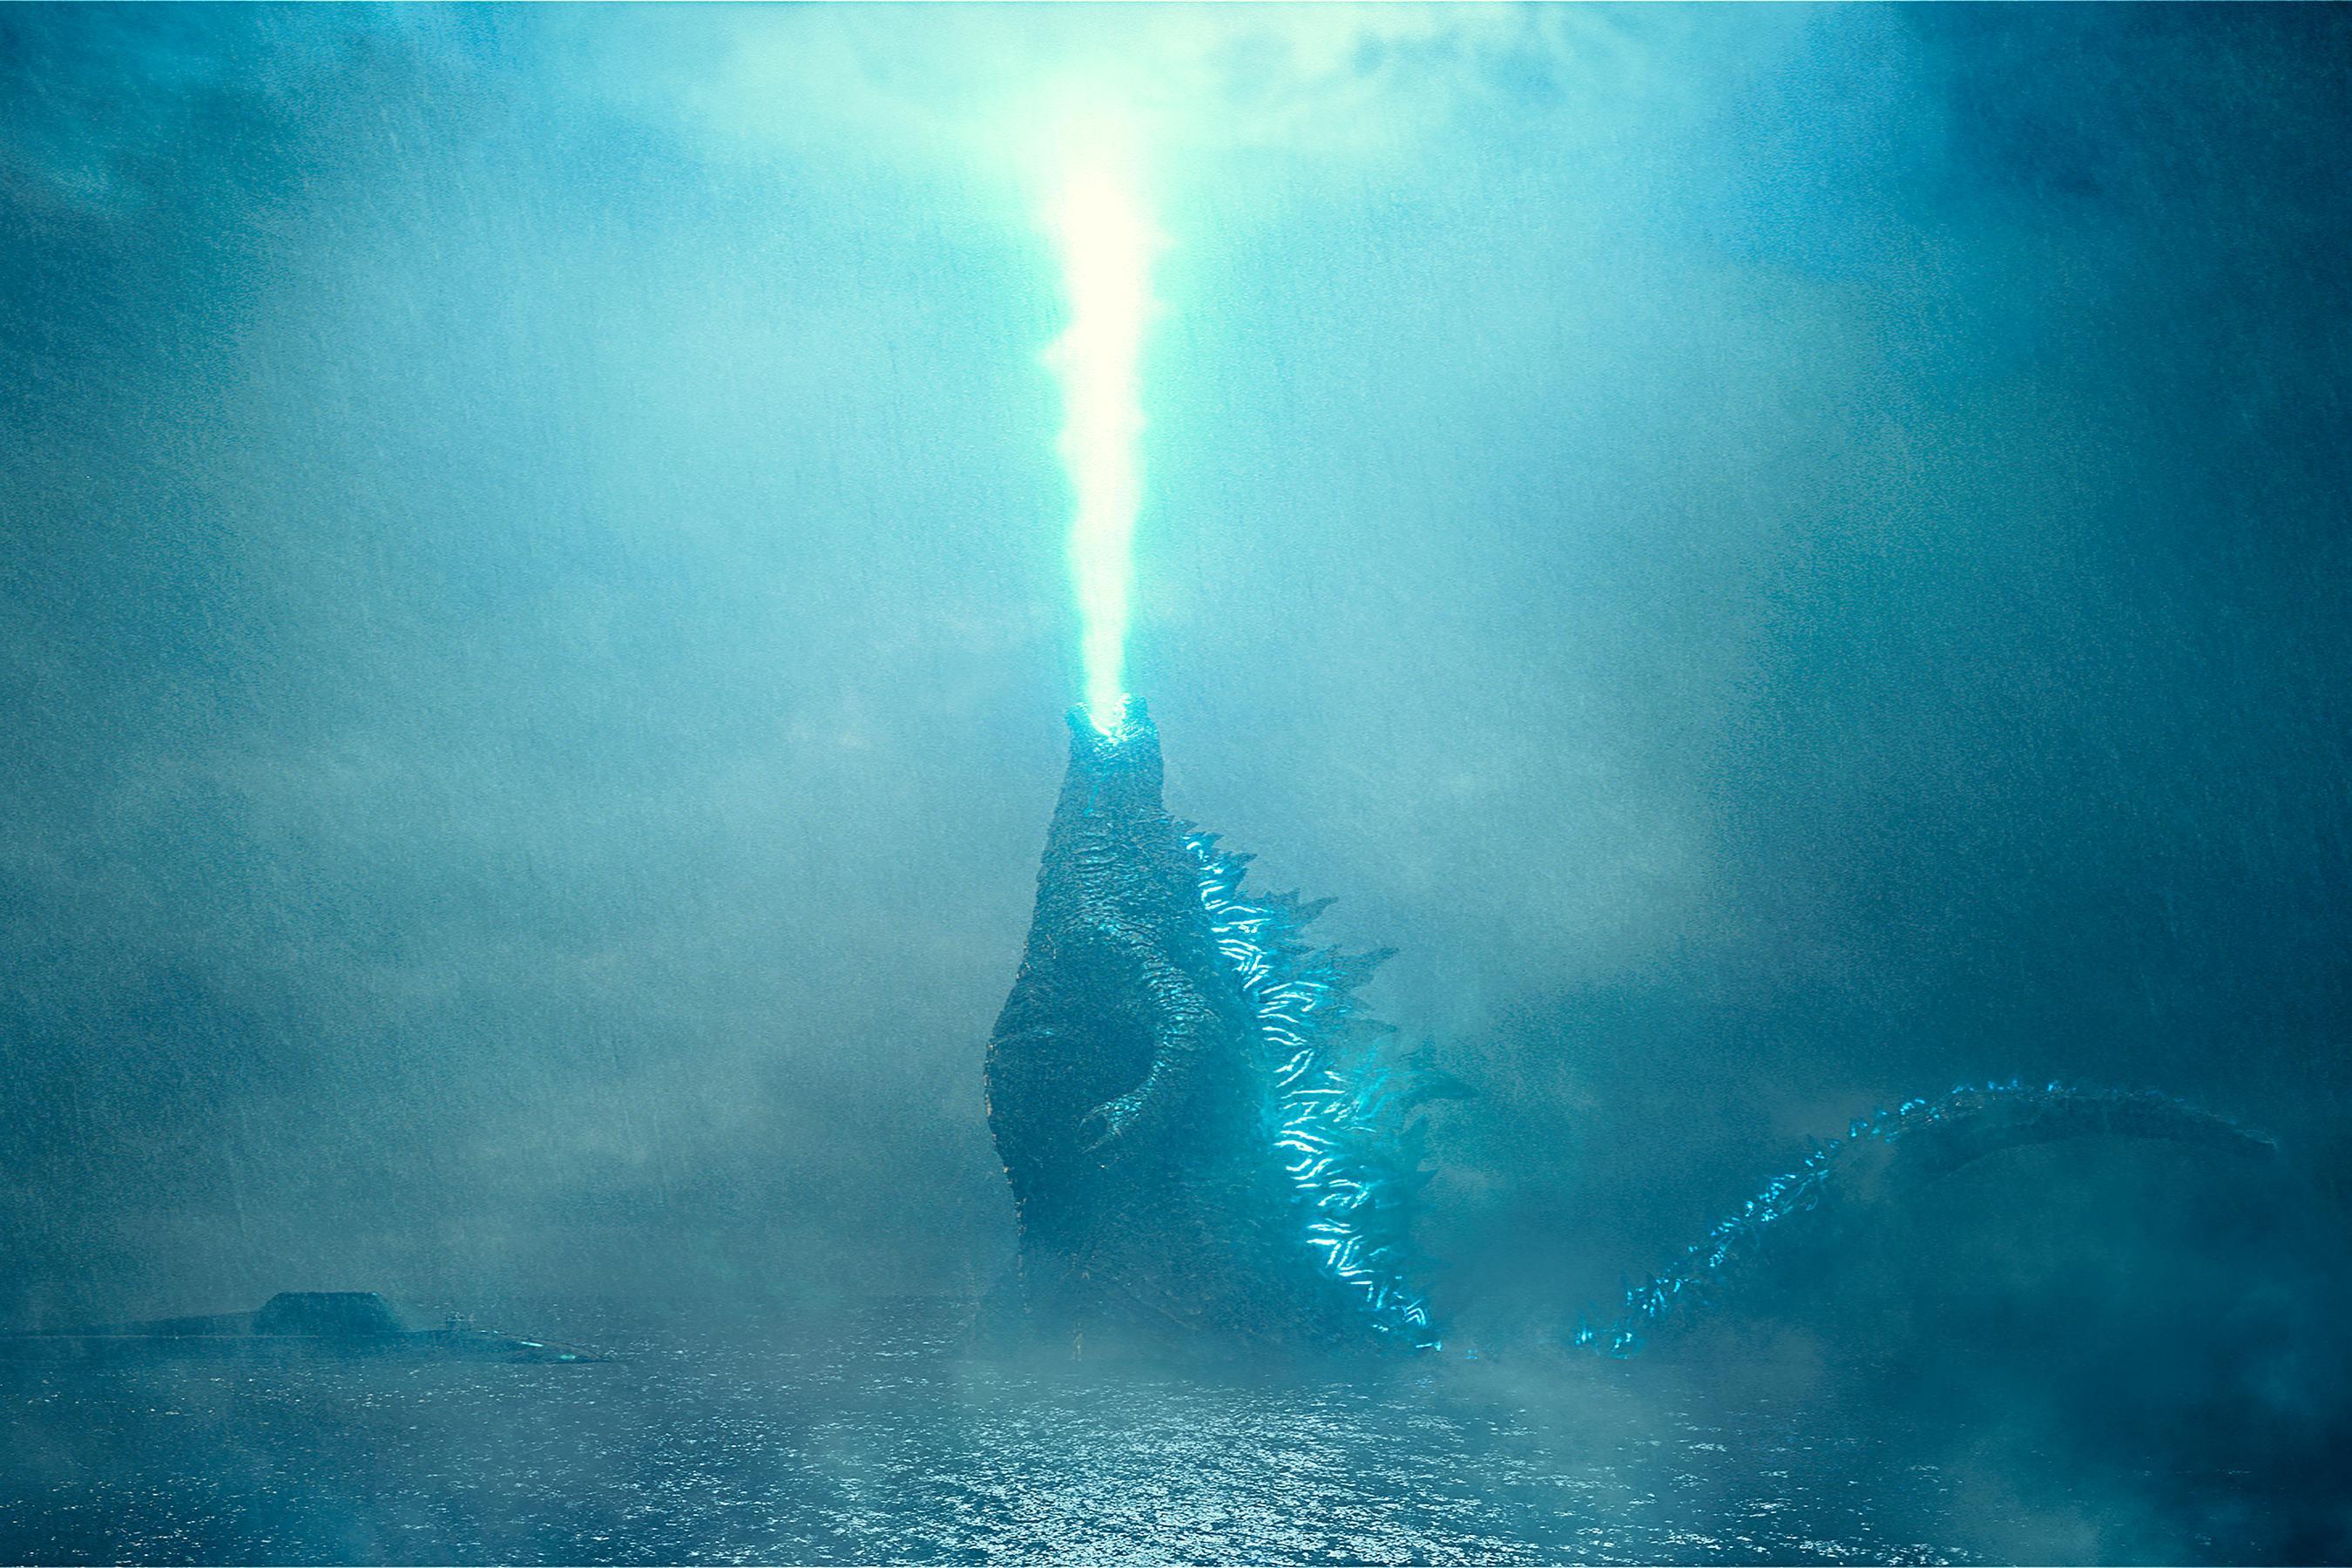 Godzilla: King of the Monsters: First reactions praise epic, insane